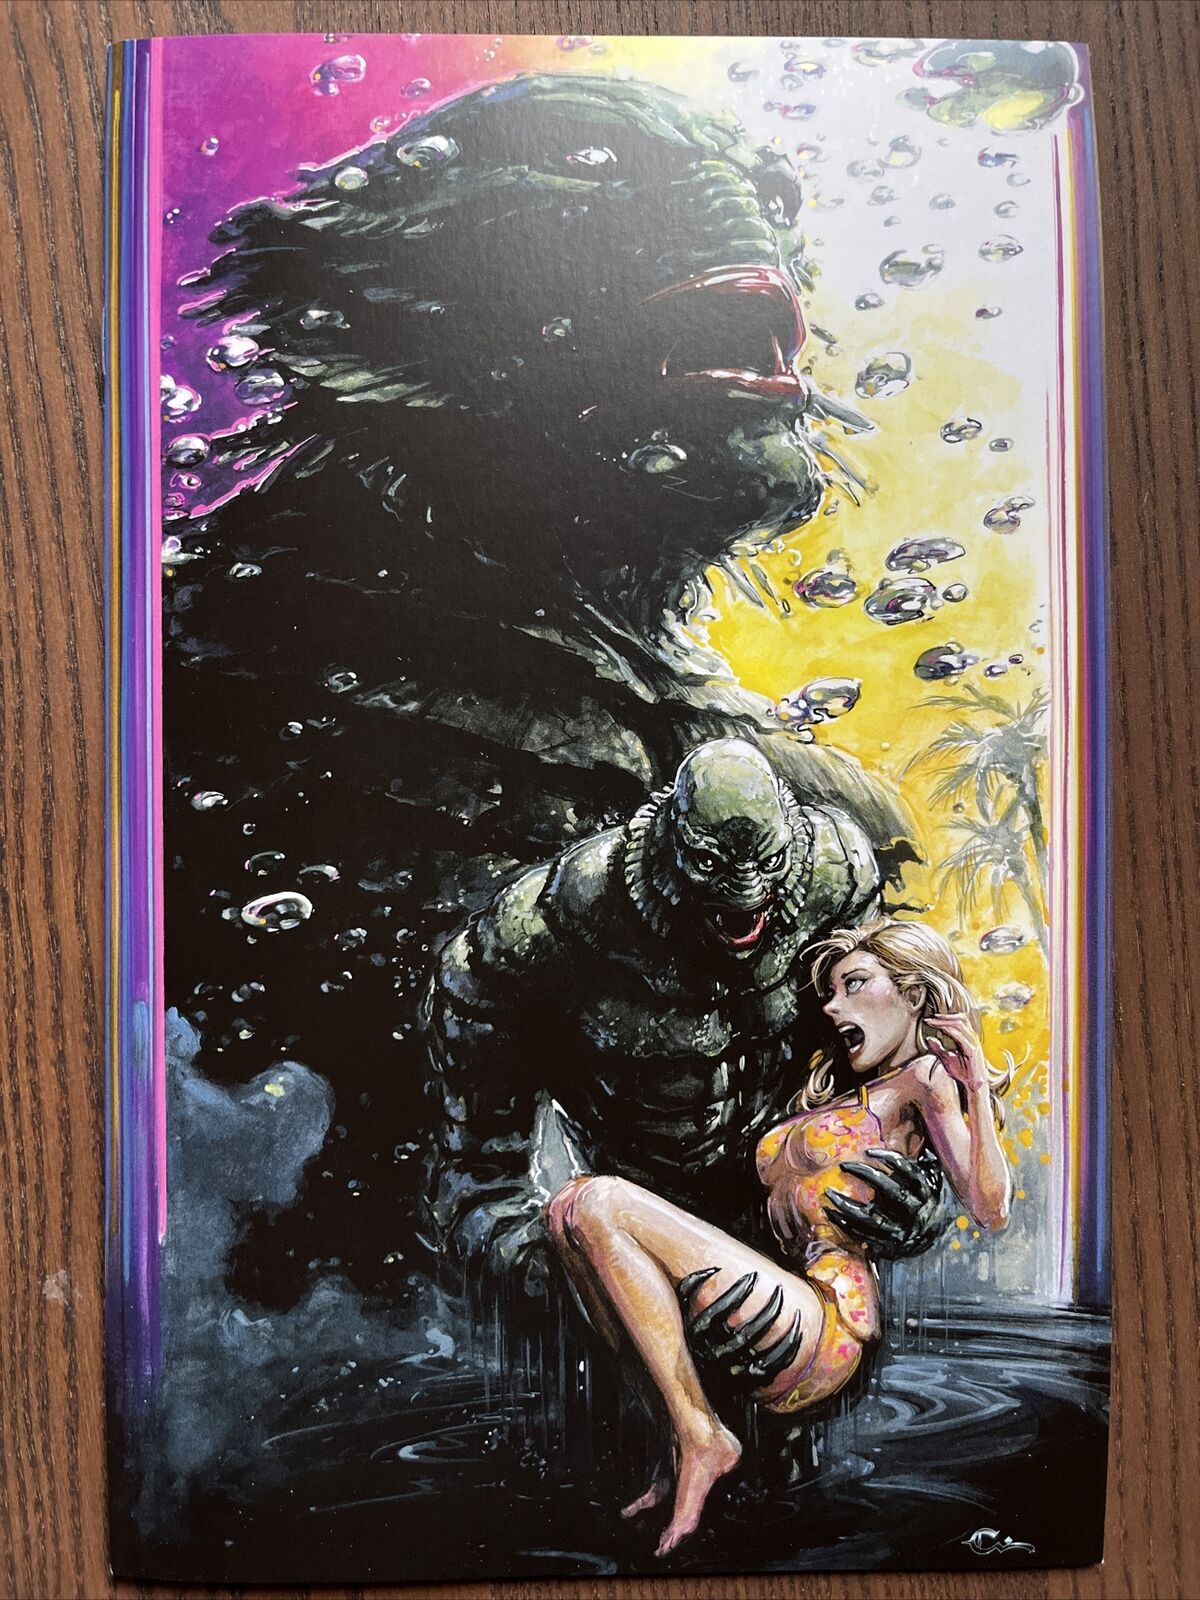 CREATURE FROM THE BLACK LAGOON LIVES #1 CLAYTON CRAIN VARIANT